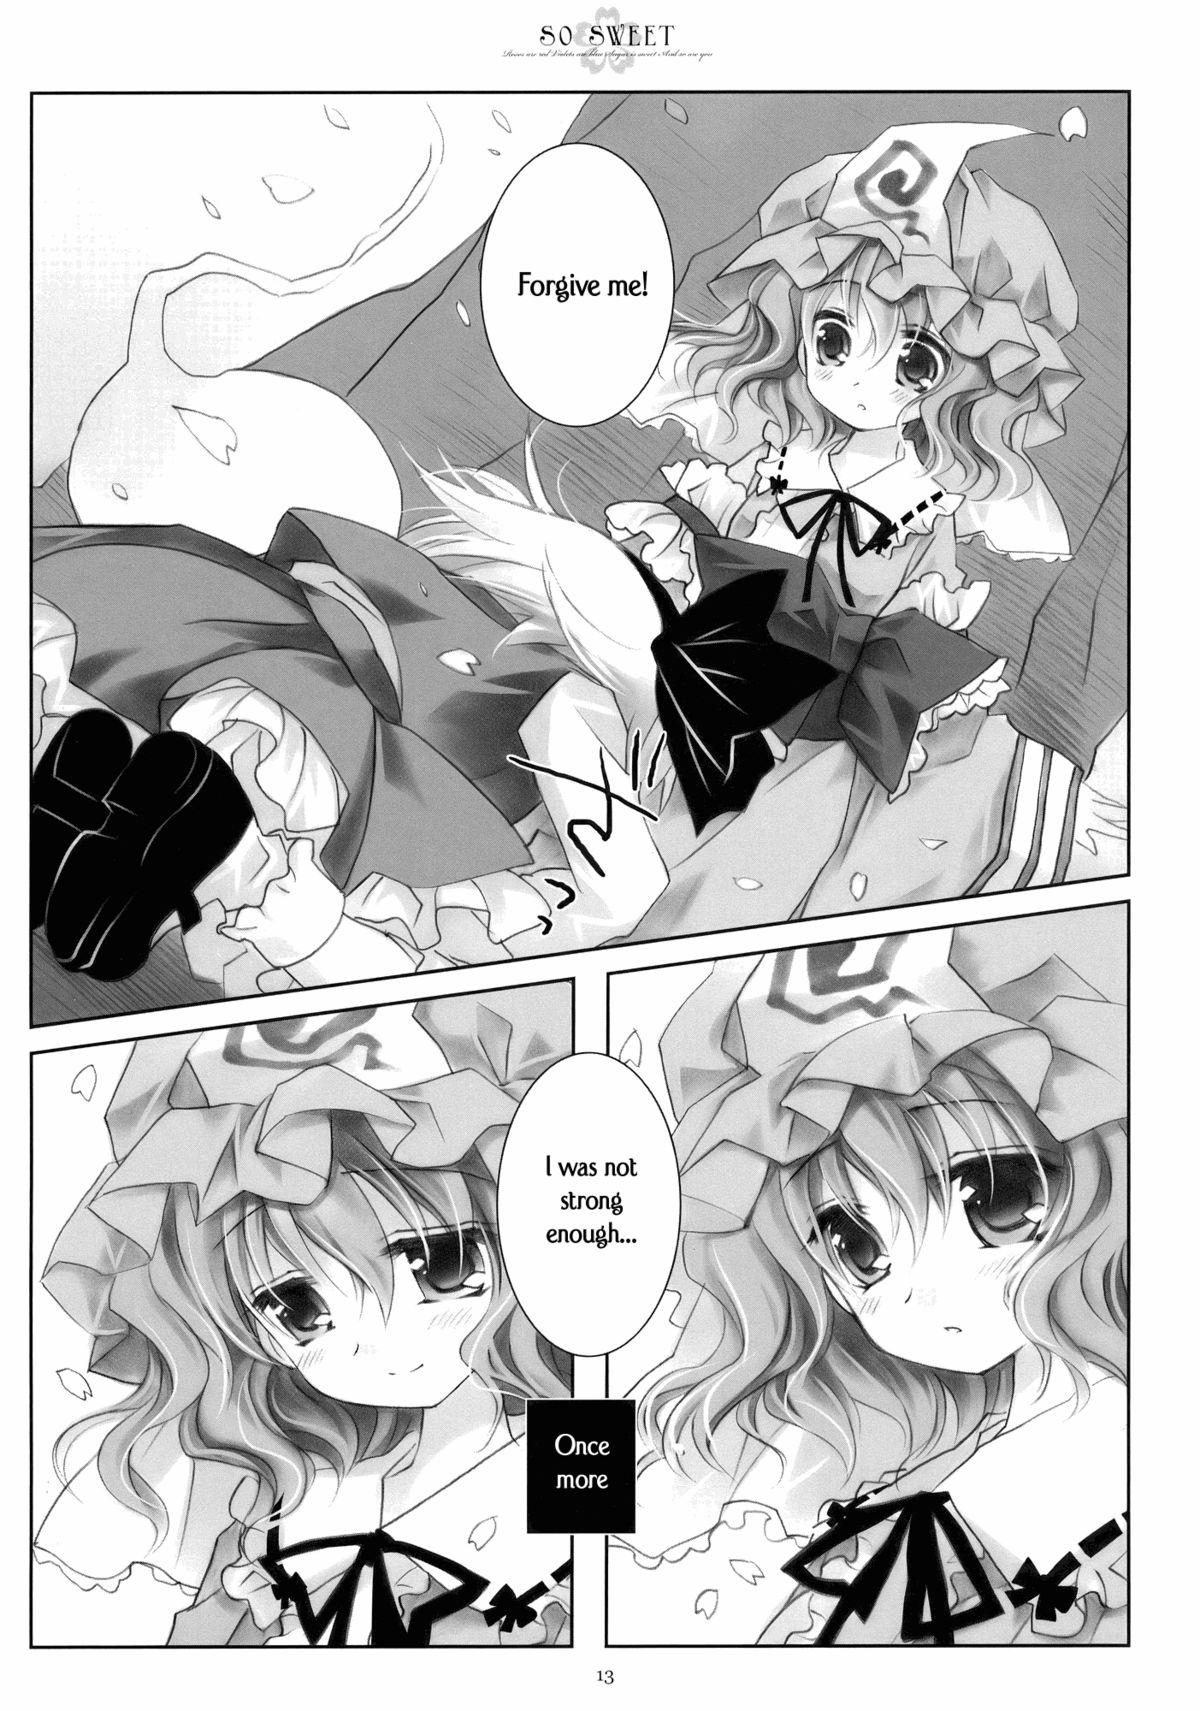 Bus SO SWEET - Touhou project Freeteenporn - Page 12